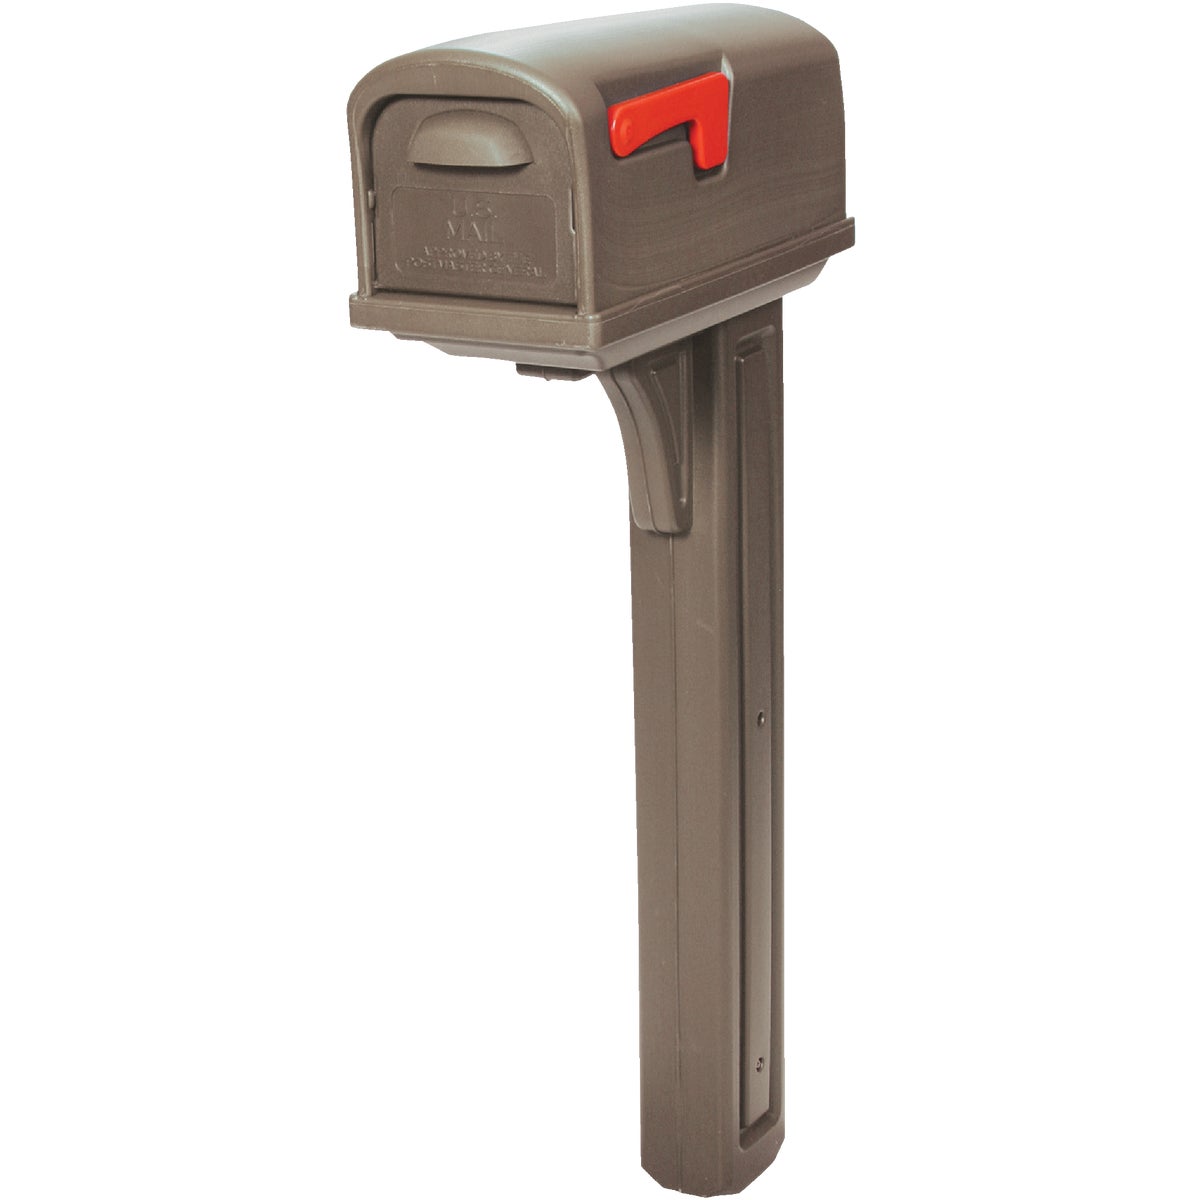 Item 242339, Mailbox and post combo is made from impact resistant heavy-duty plastic 